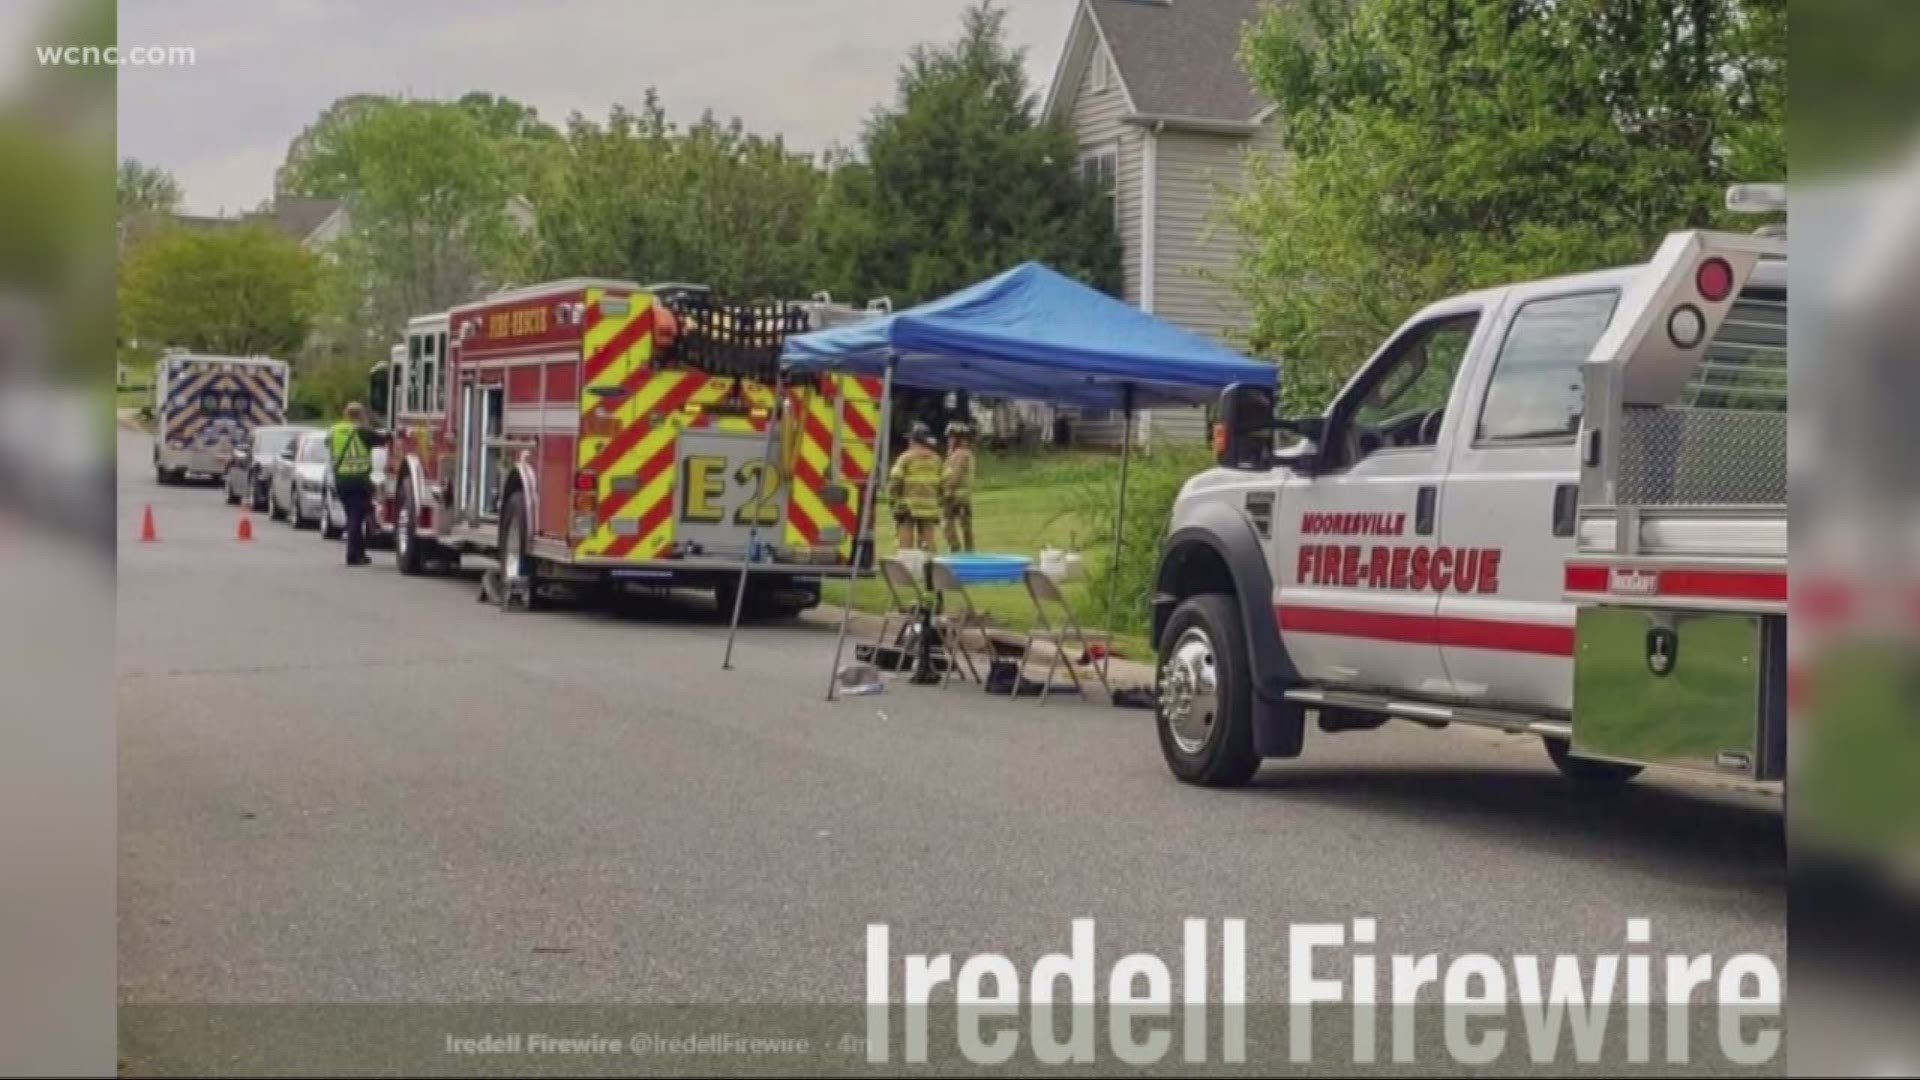 According to Iredell Firewire, someone called 911 after finding a body inside a home on Devon Forrest Drive. Hazmat crews are on the scene because there was reportedly a drug lab inside the home.